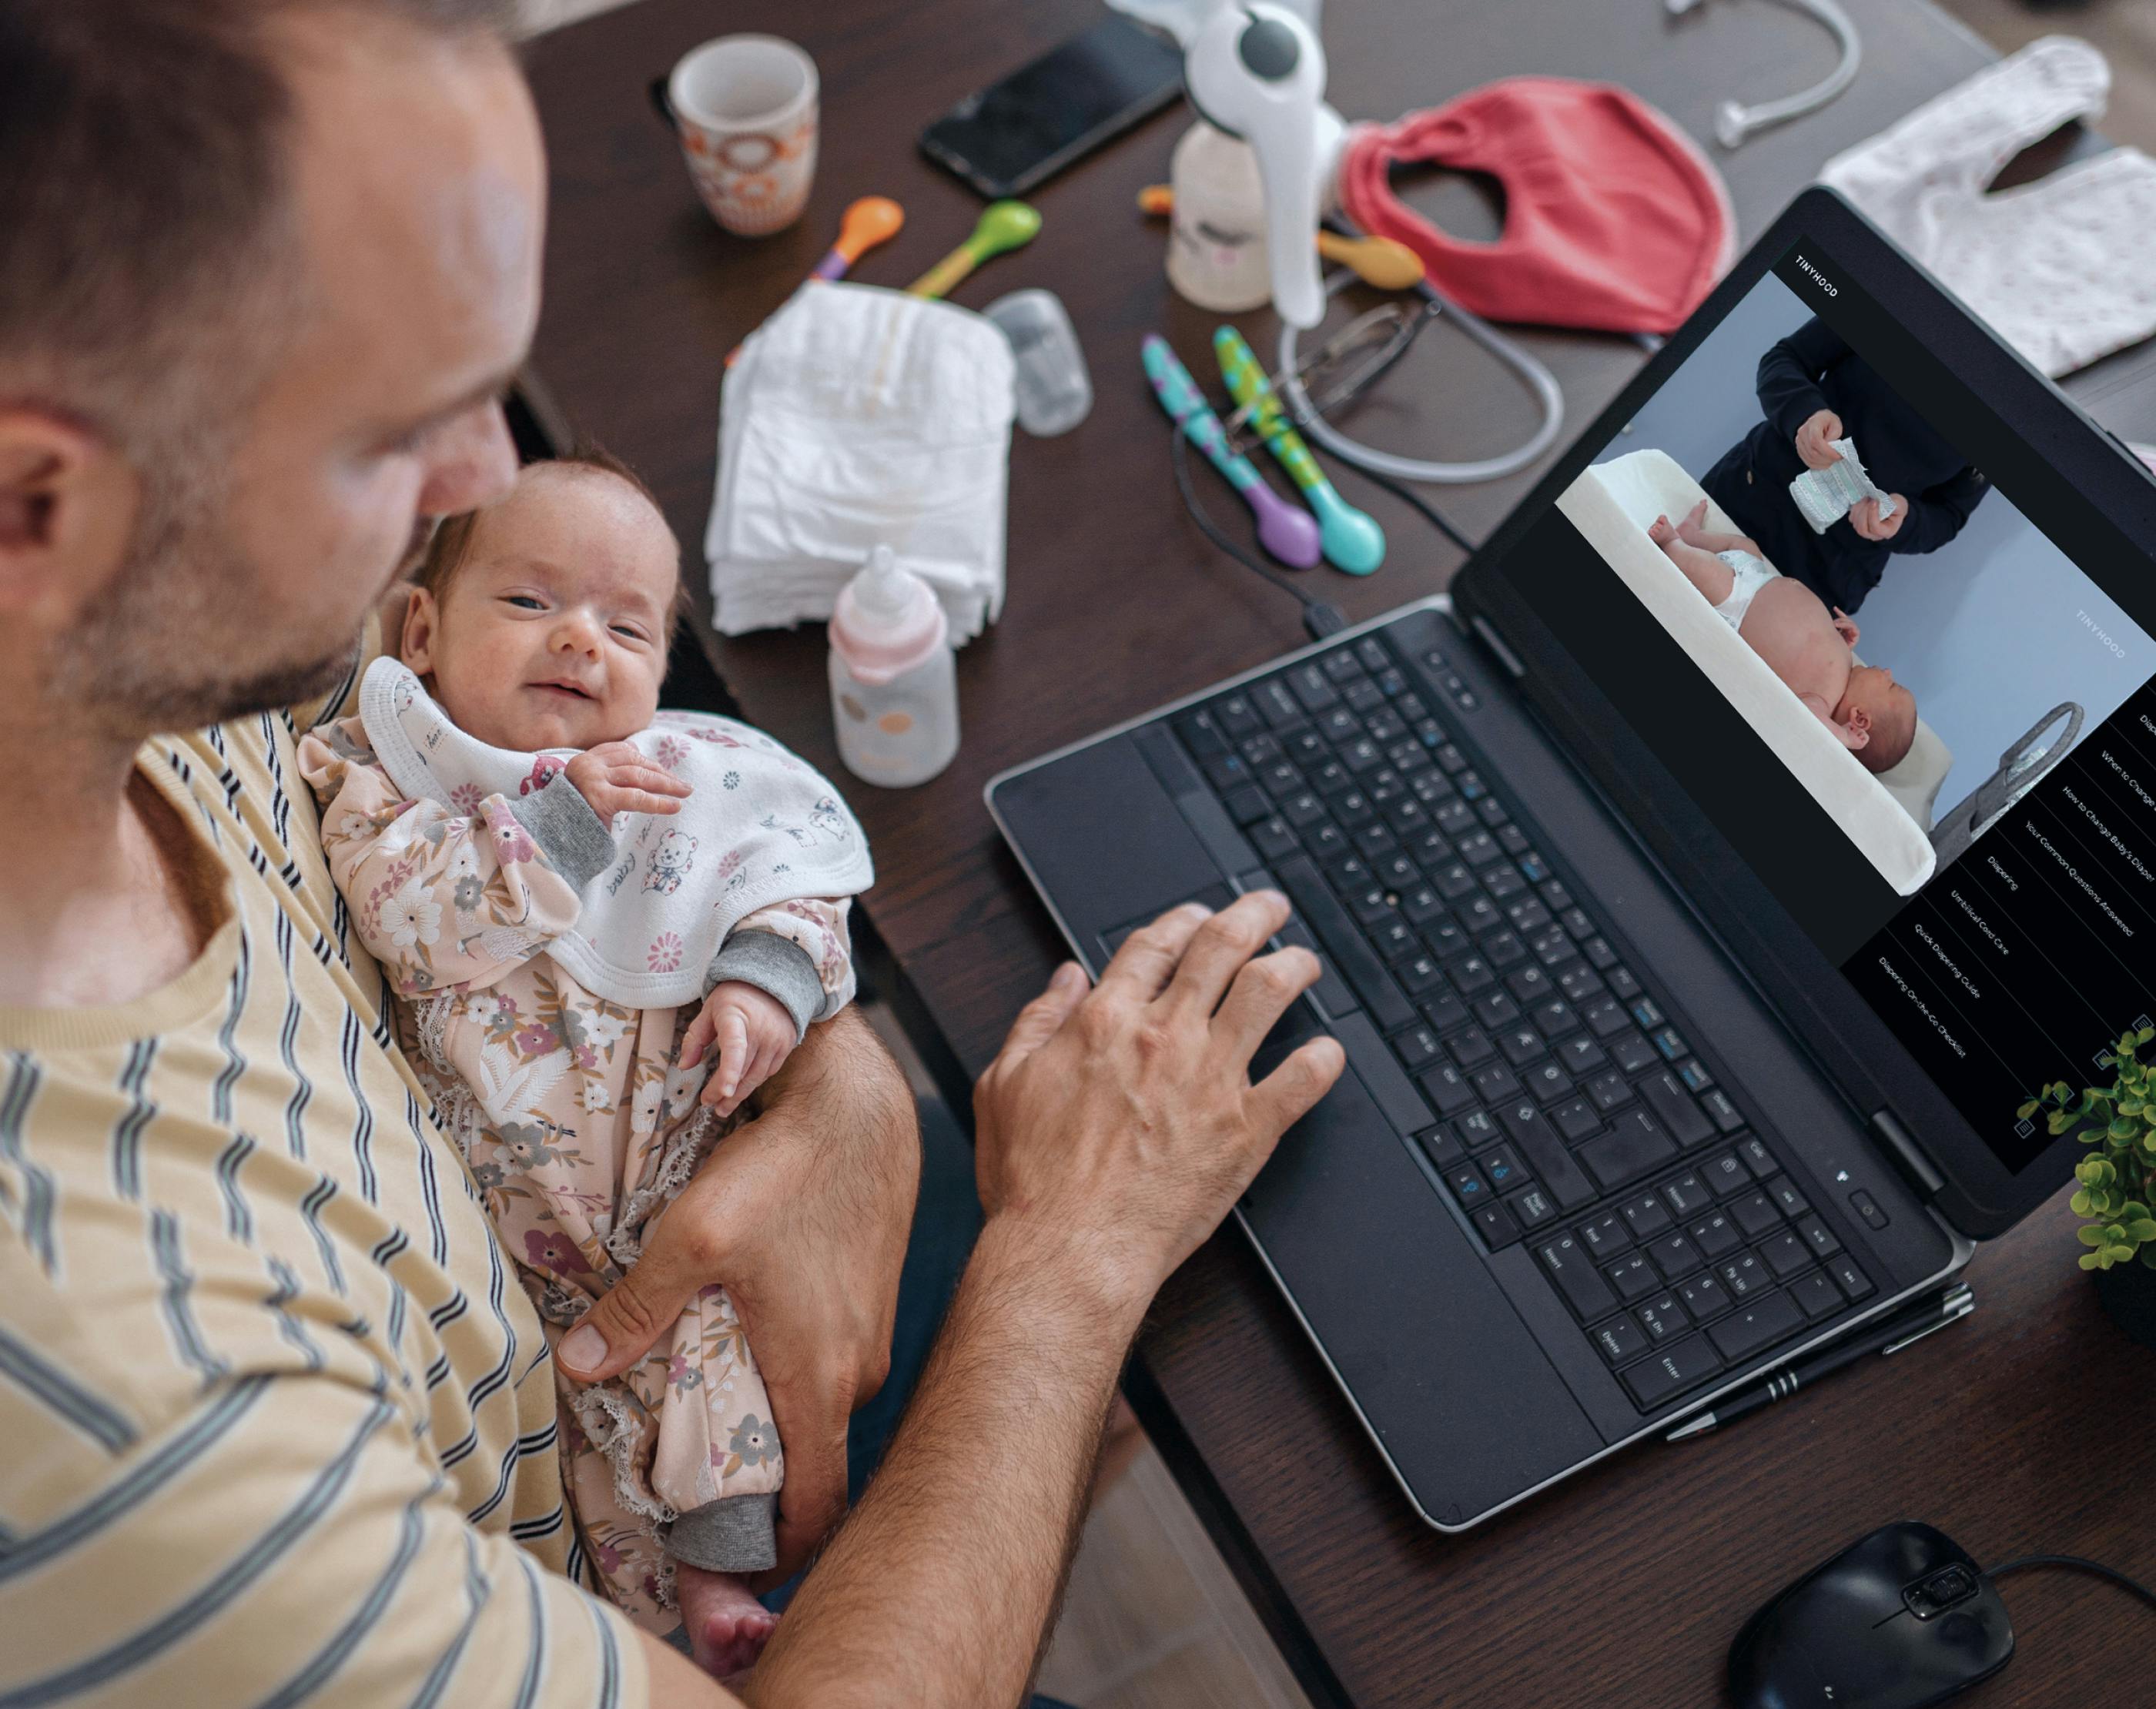 Background. Woman holding baby and watching video on tablet.